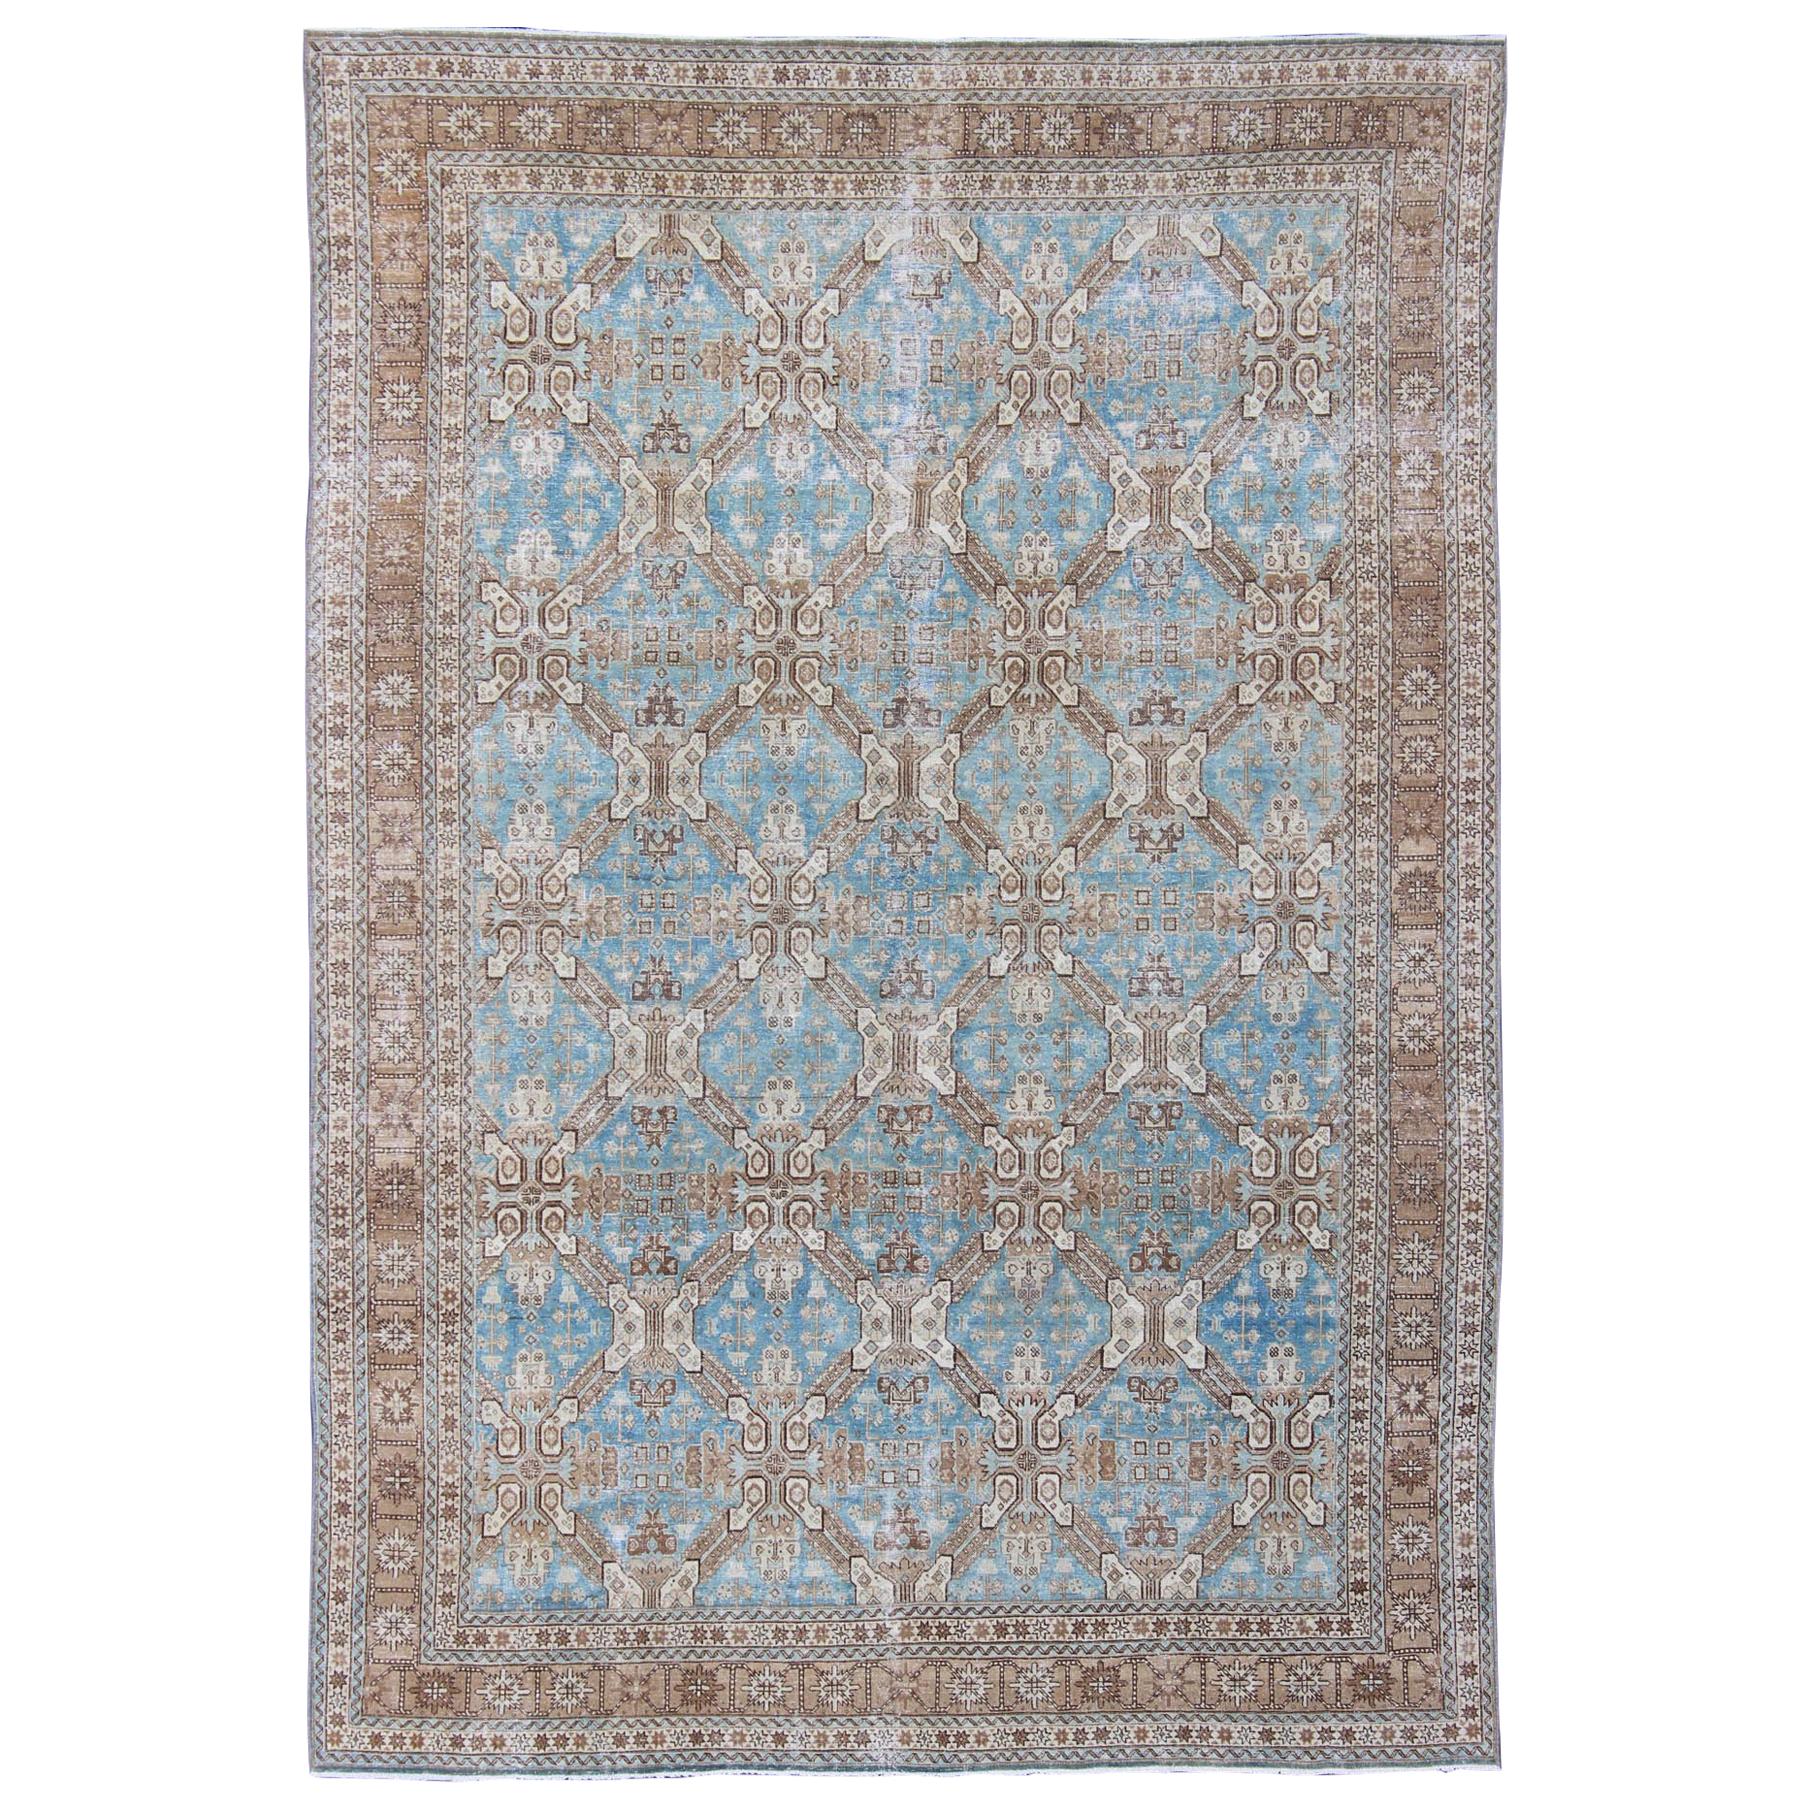 Antique All-Over Pattern Persian Geometric Tabriz Rug in Blue and Taupe For Sale